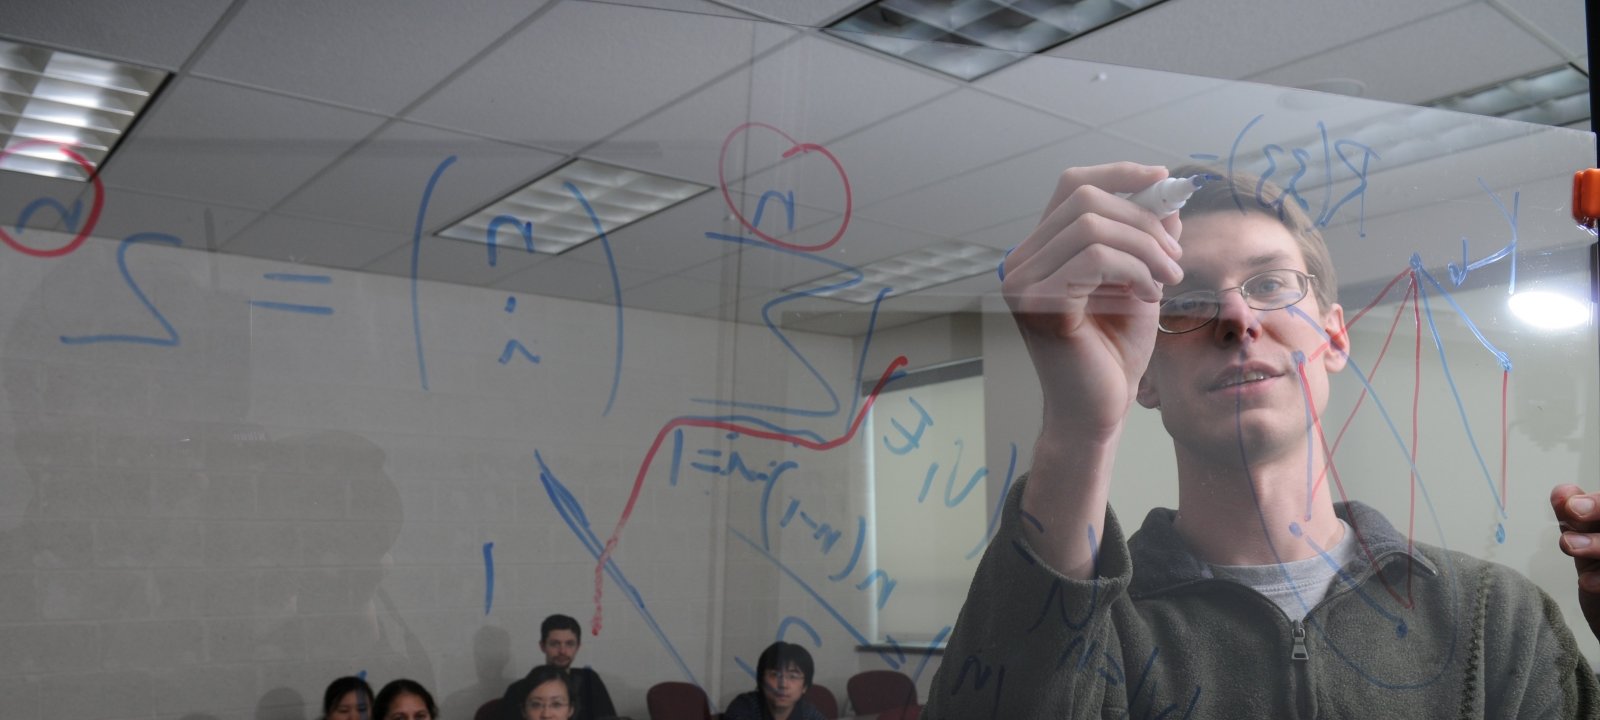 Mathematician writing out equations on a glass board.